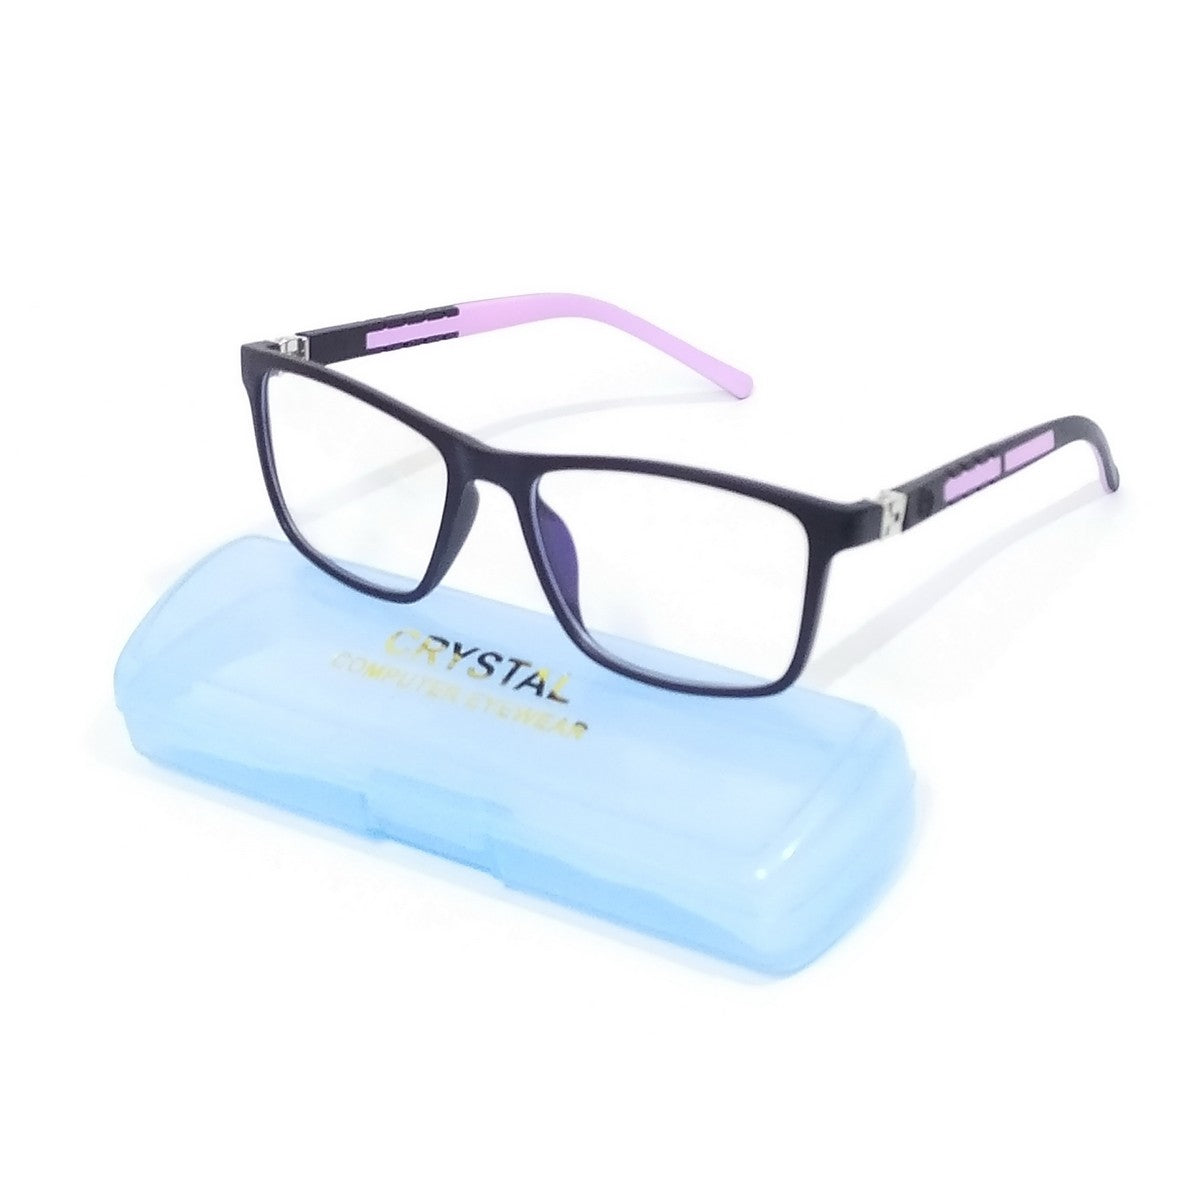 Pink Perfection: Square Black & Pink Glasses - Ideal Blue Light Defense for  6-10-Year-Old Girls